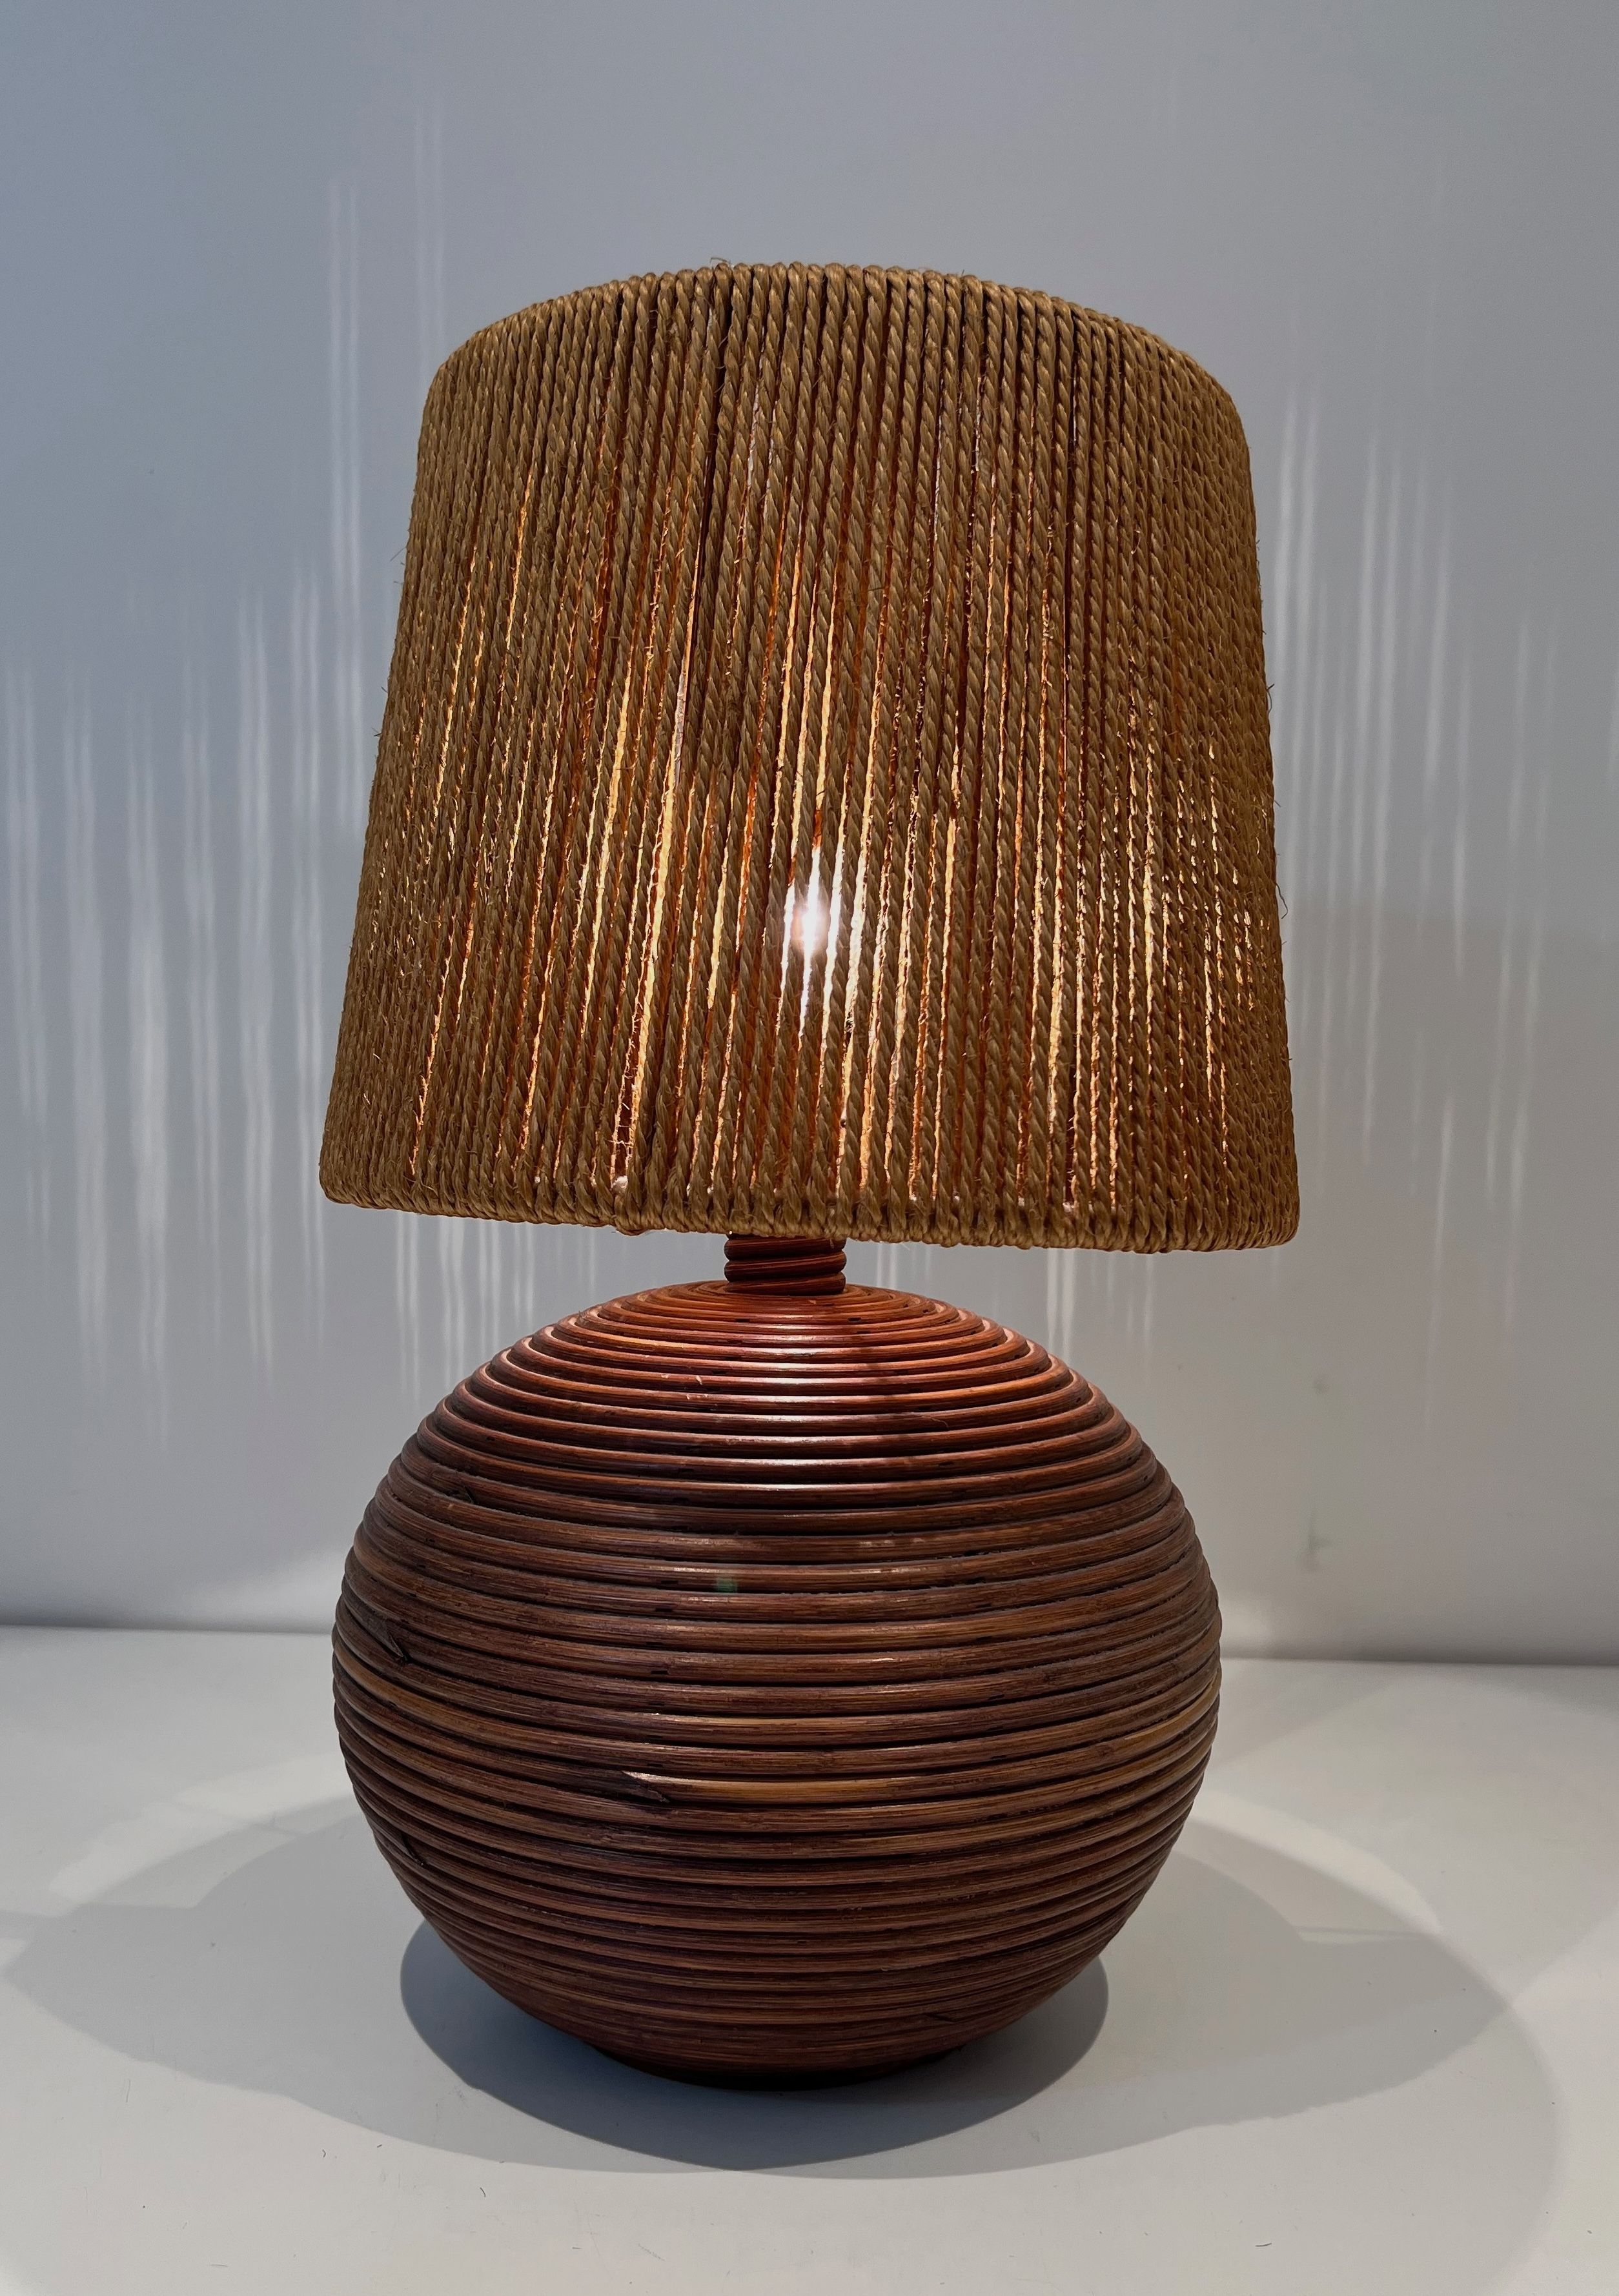 Round Rattan Lamp with Rope Lampshade in the Style of Adrien Adoux and Frida Minet